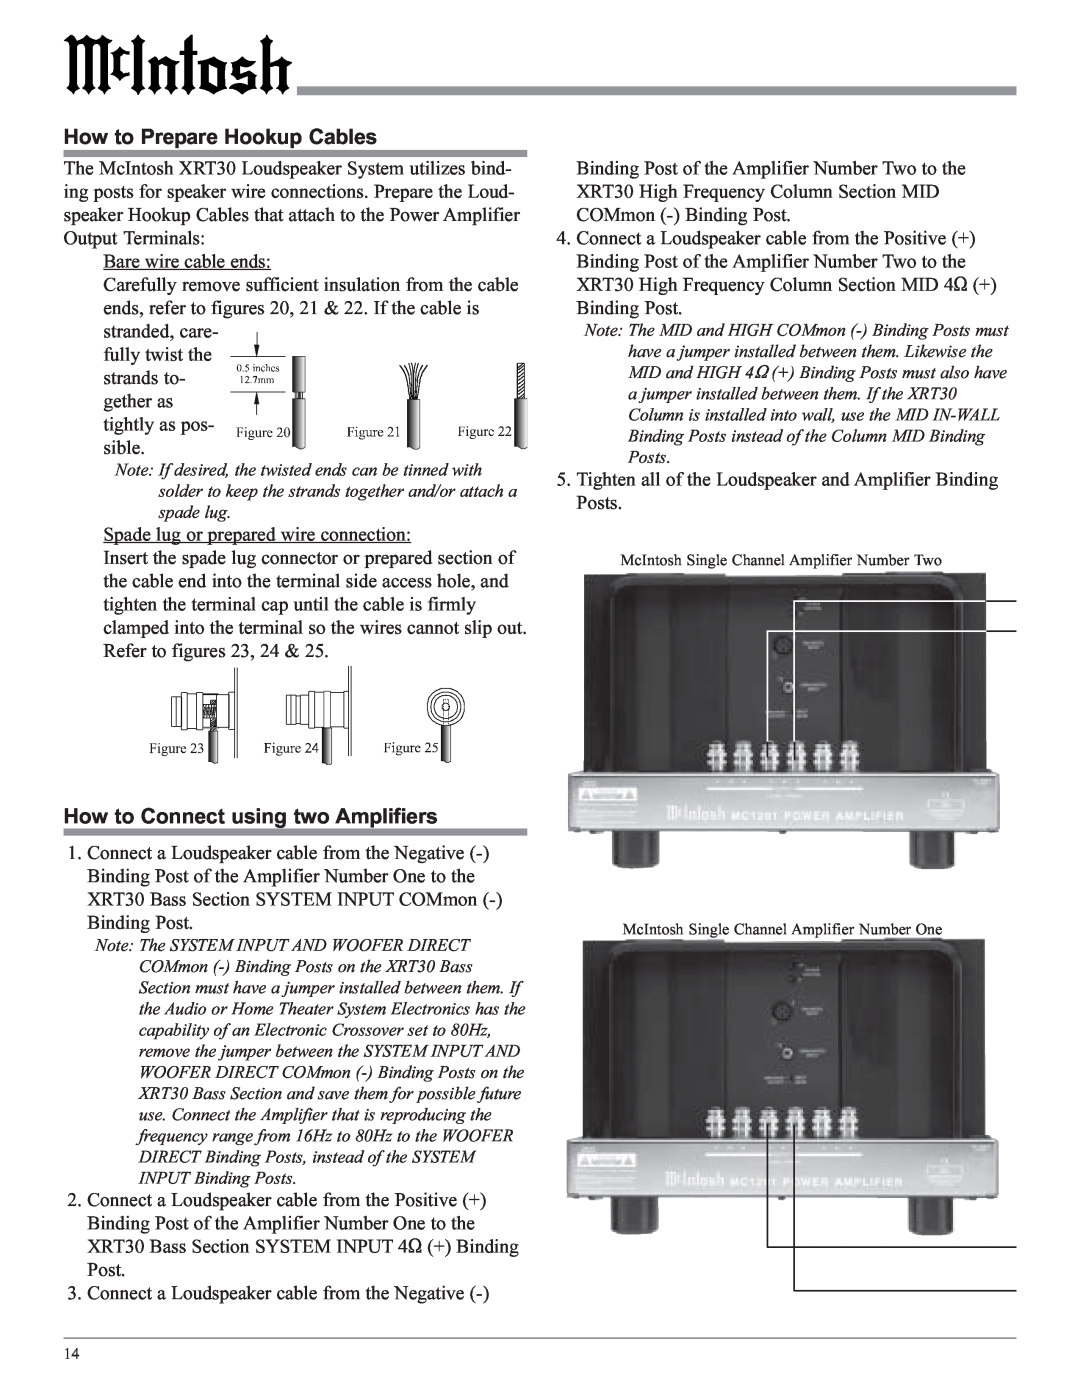 McIntosh XRT30 owner manual How to Connect using two Amplifiers, How to Prepare Hookup Cables 